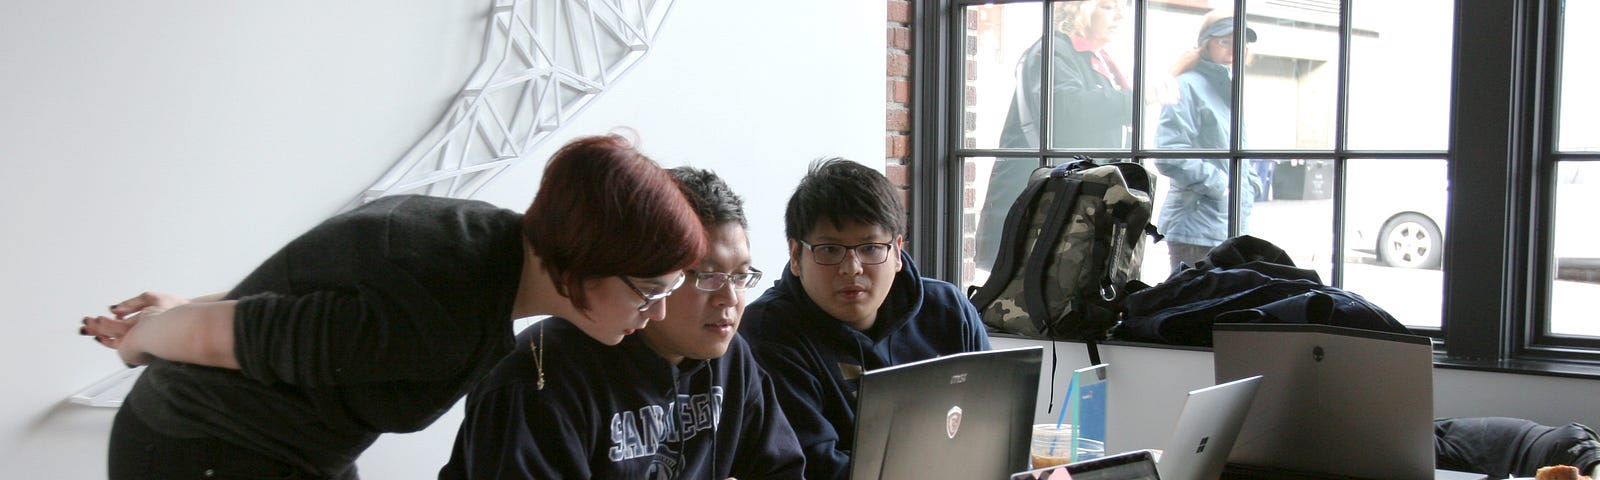 Woman with short red hair leaning over helping two men with laptops.